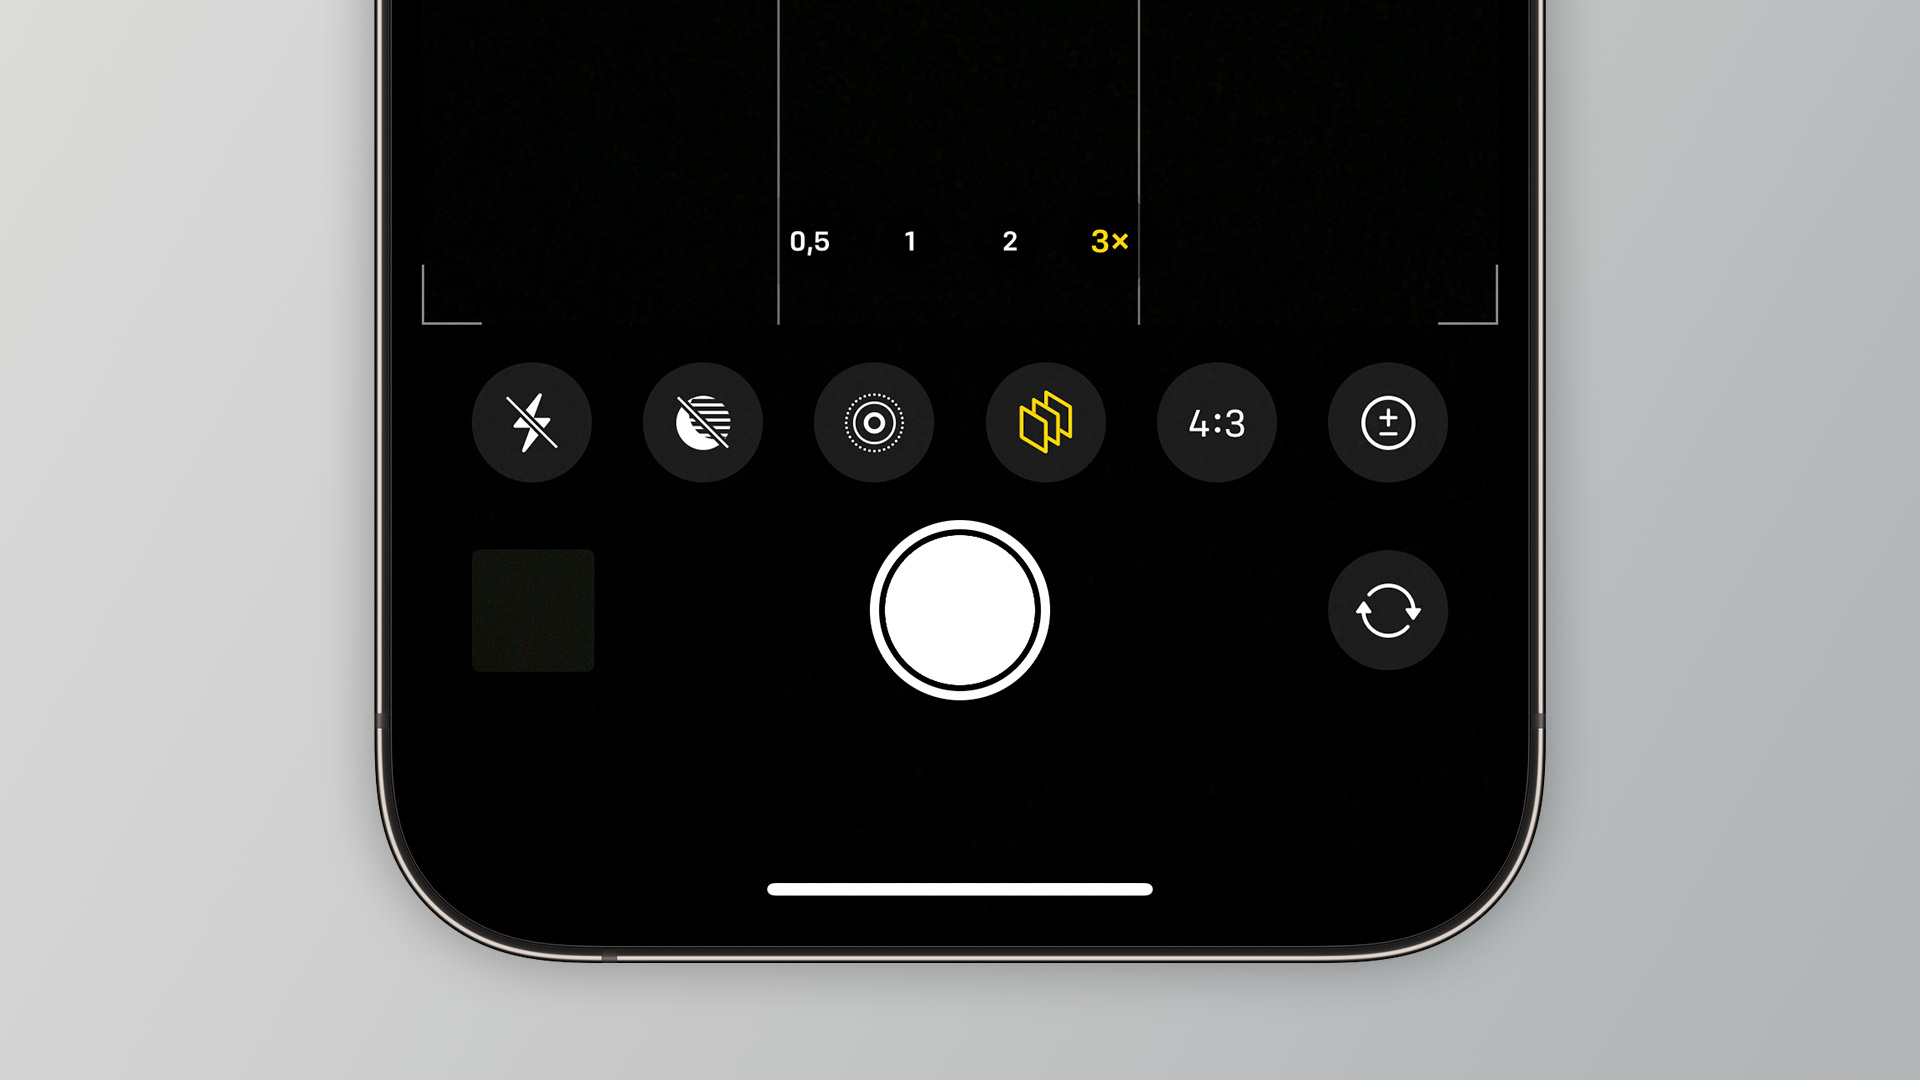 These camera settings can help you take better photos and videos on your iPhone